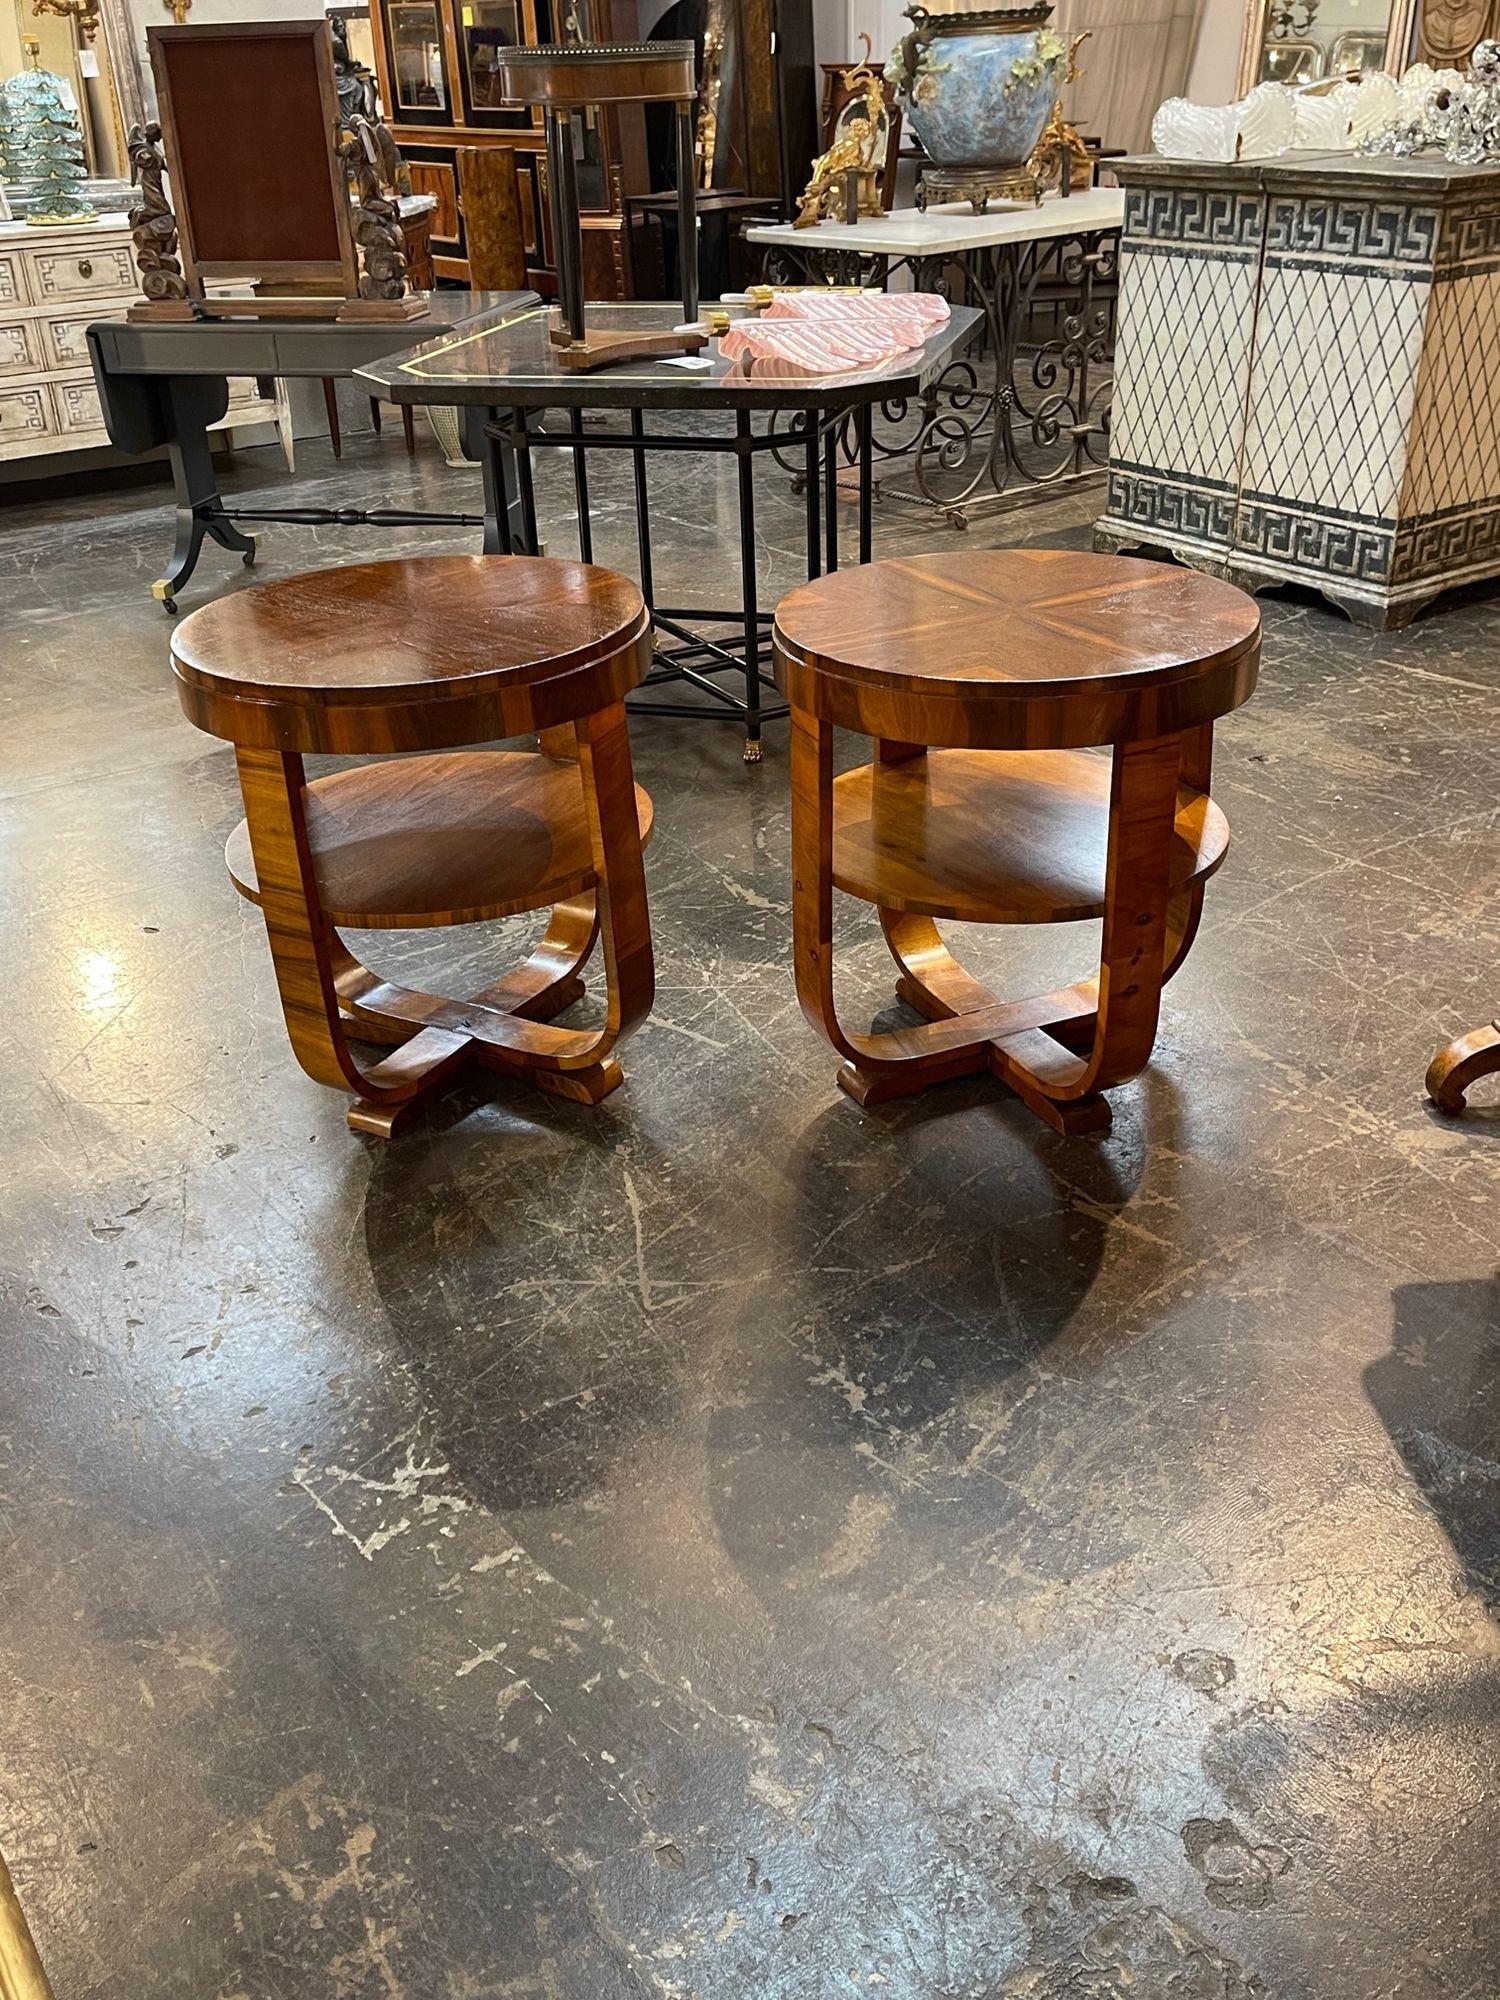 Gorgeous pair of mid-century Italian Art Deco walnut side tables. Beautiful polished finish on these and they mix well with a variety of decors. Lovely!